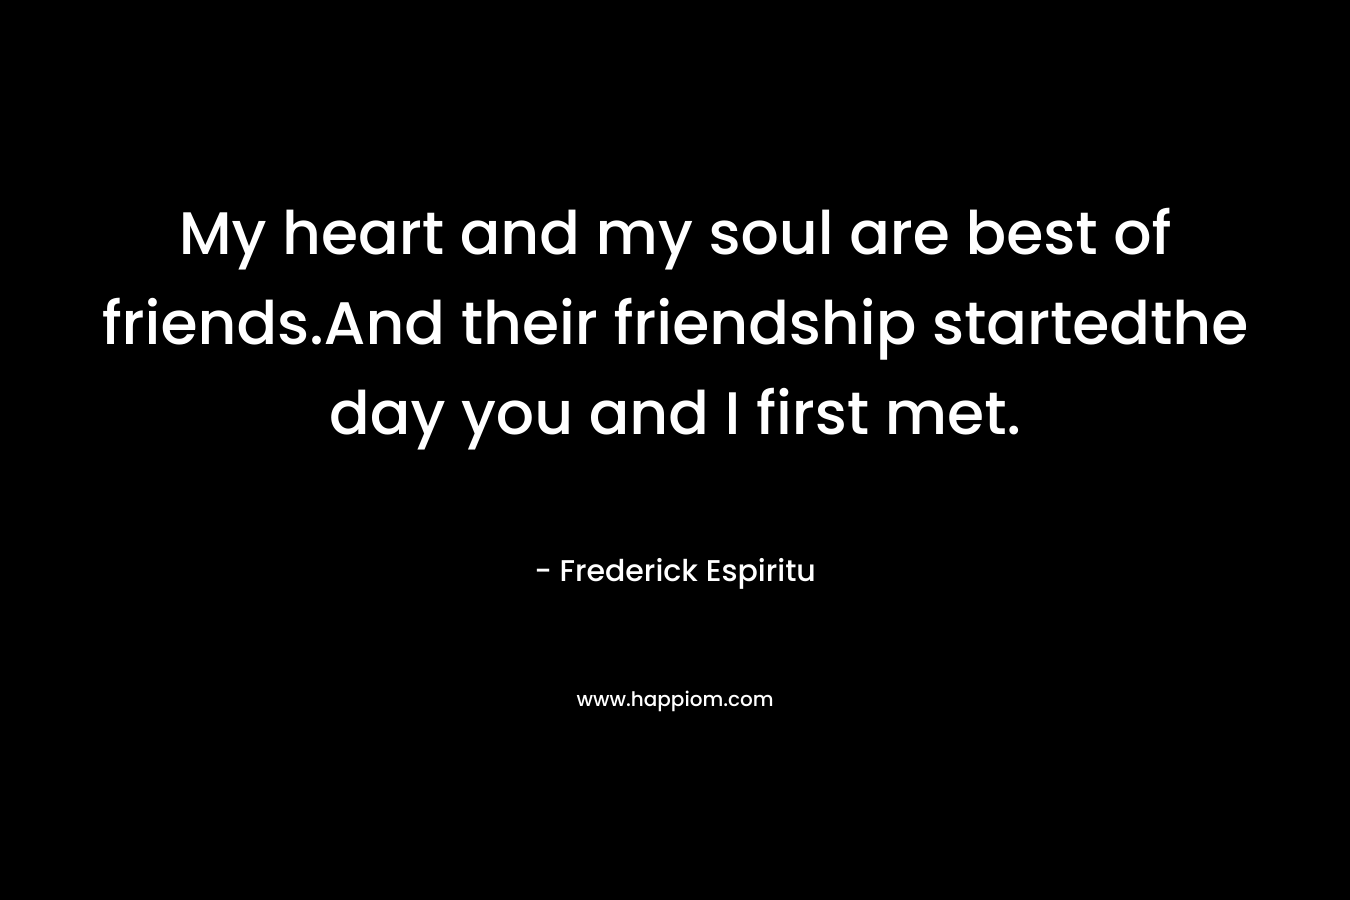 My heart and my soul are best of friends.And their friendship startedthe day you and I first met.